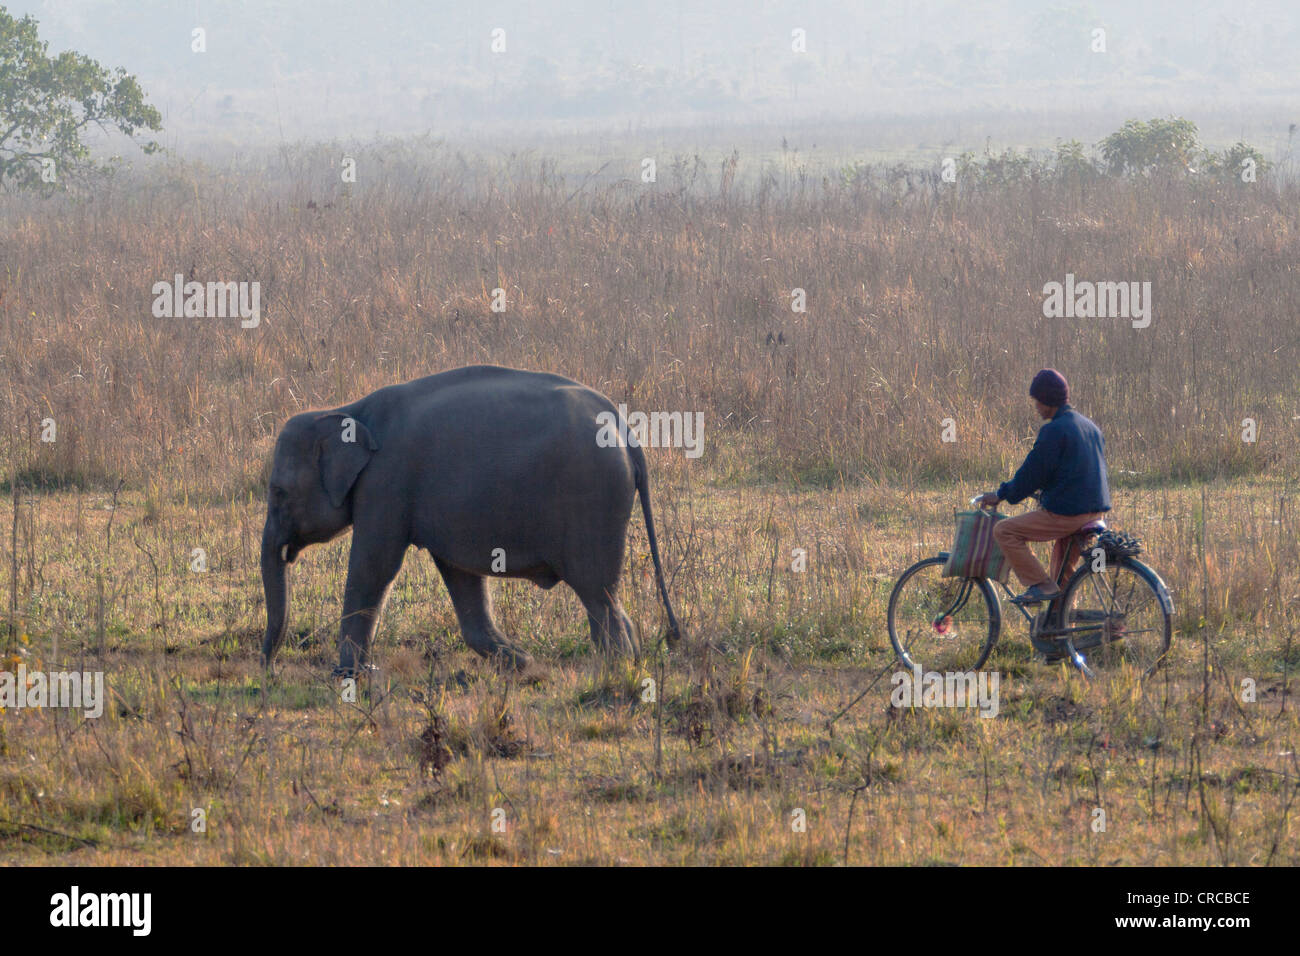 Infant elephant walks through the grassland with its cycling mahout in tow, Manas National Park, Assam, India Stock Photo